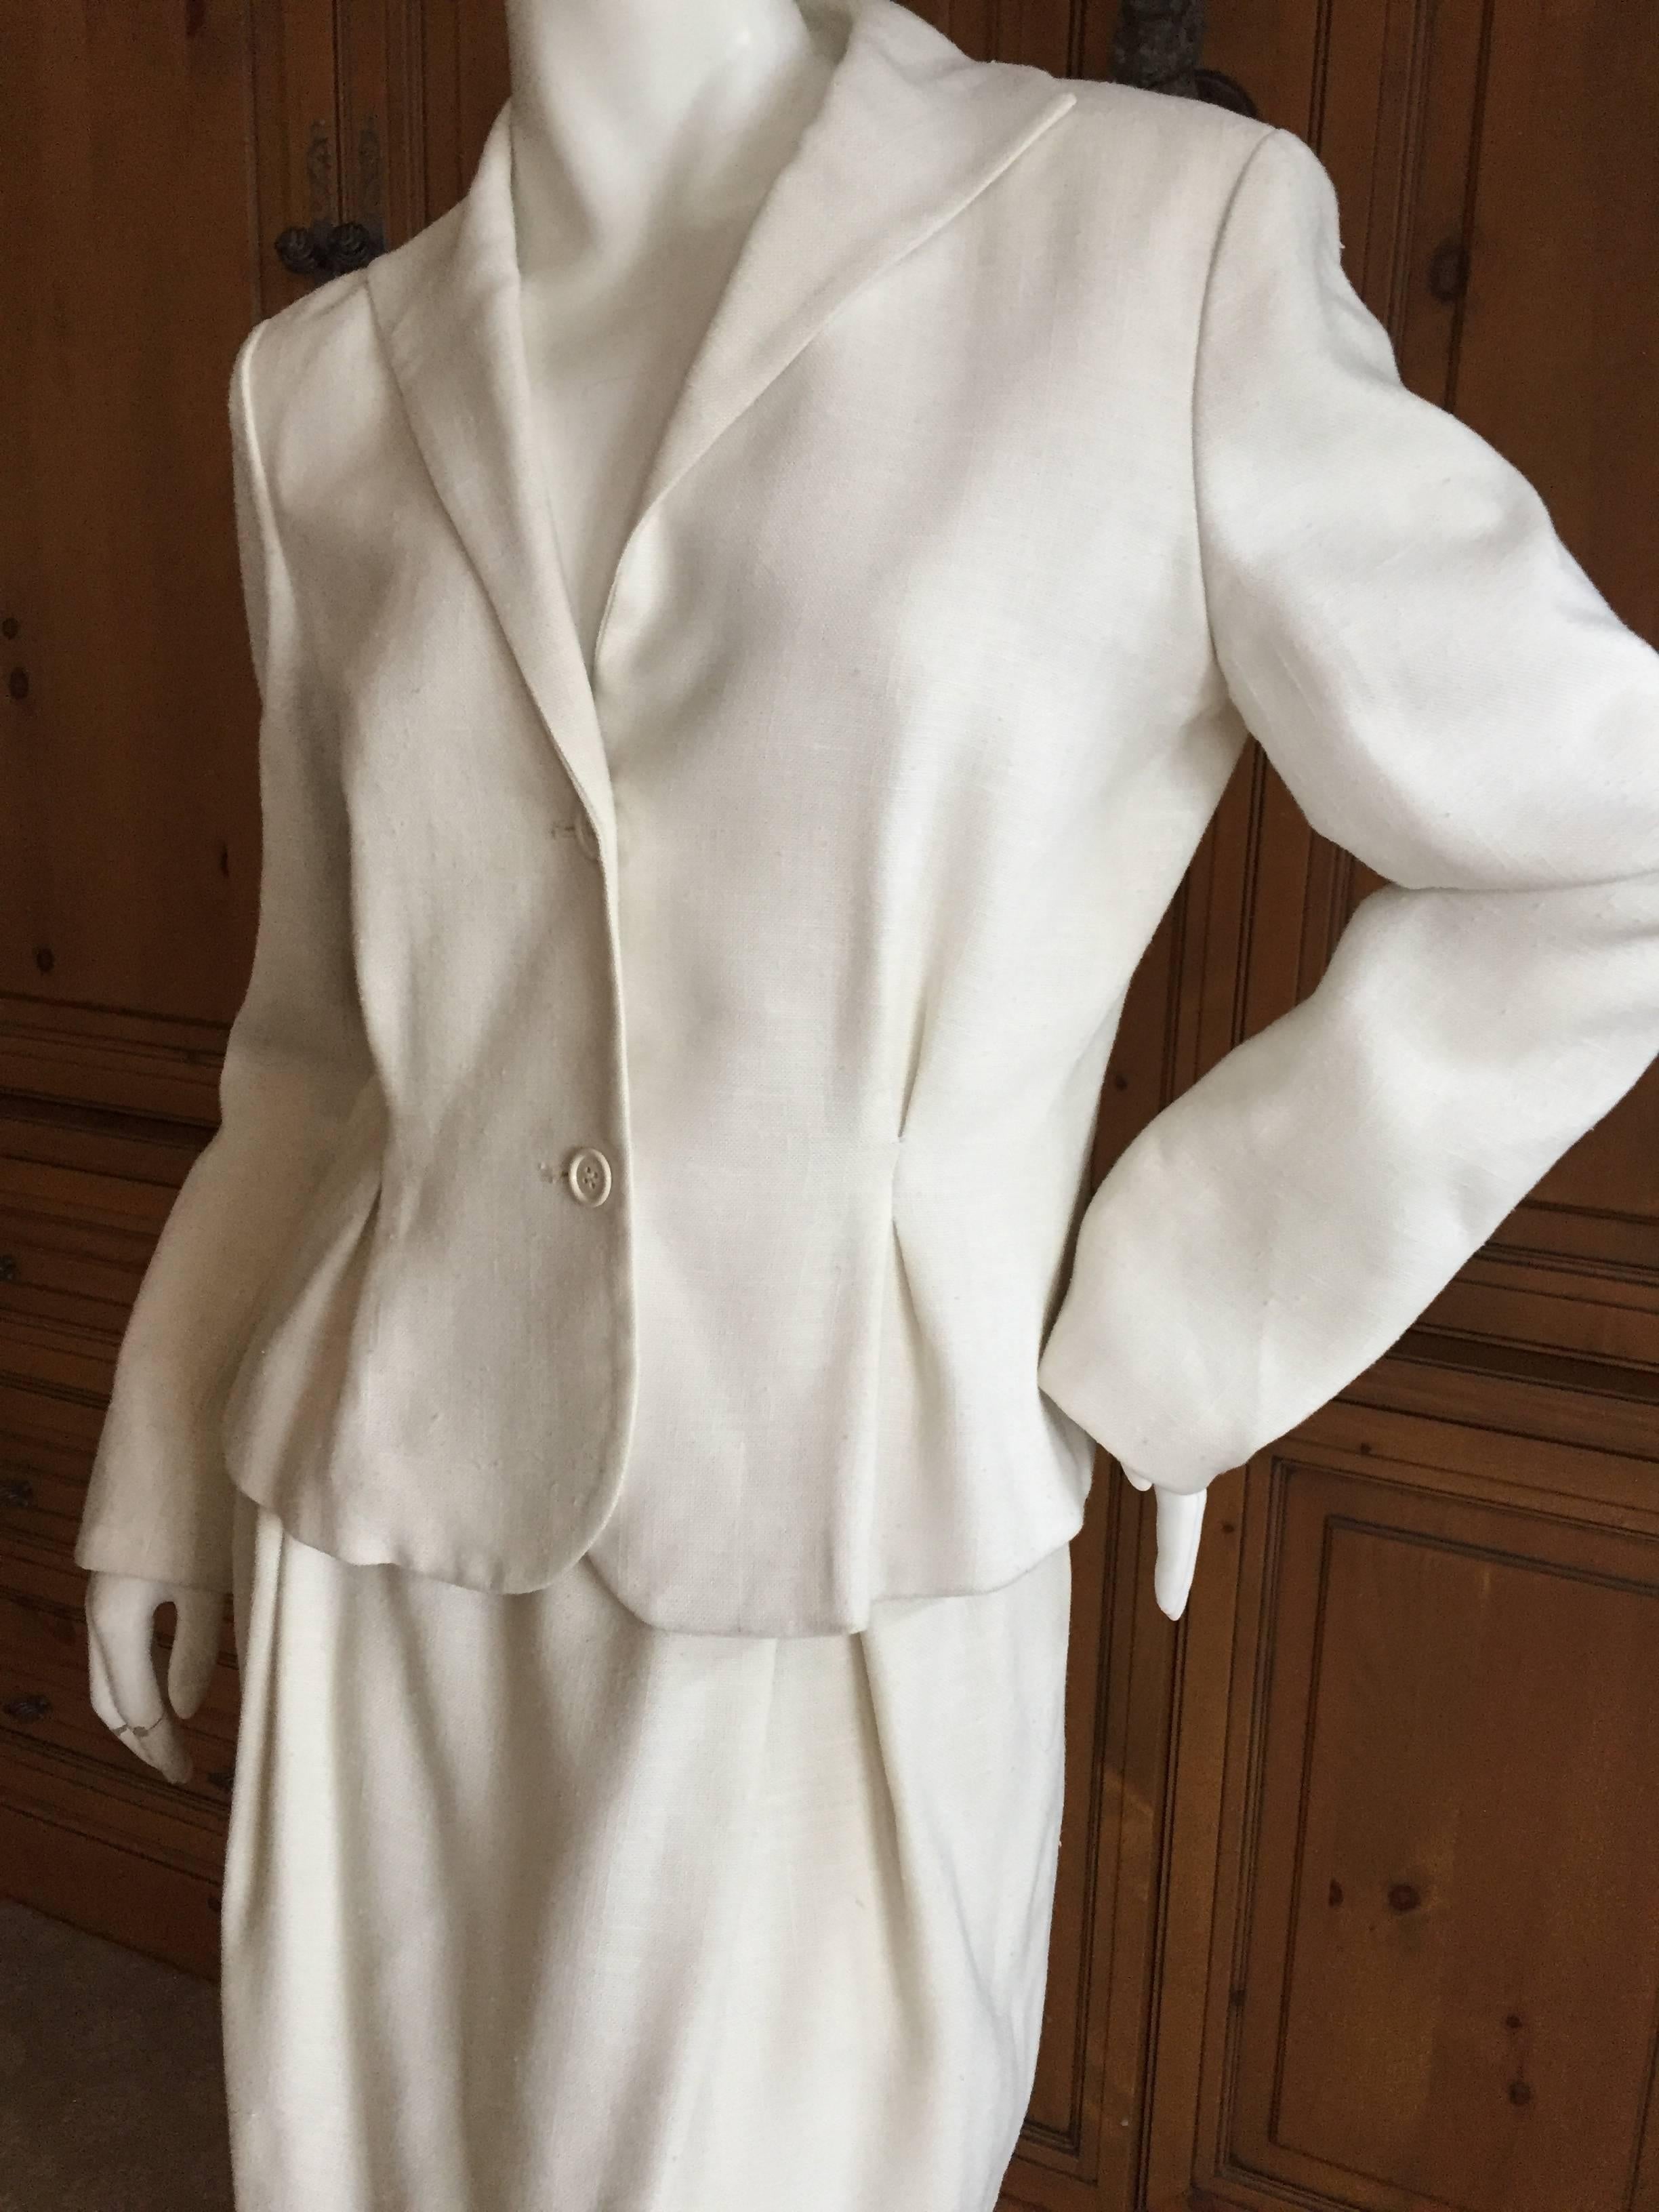 Crisply tailored ivory linen suit from Halston for I. Magnin circa 1972.
Skirt features inverted pleating at the waist, which is echoed in a pleat on the jacket. Very simple and elegant, pure Halston.
Jacket
Bust 38